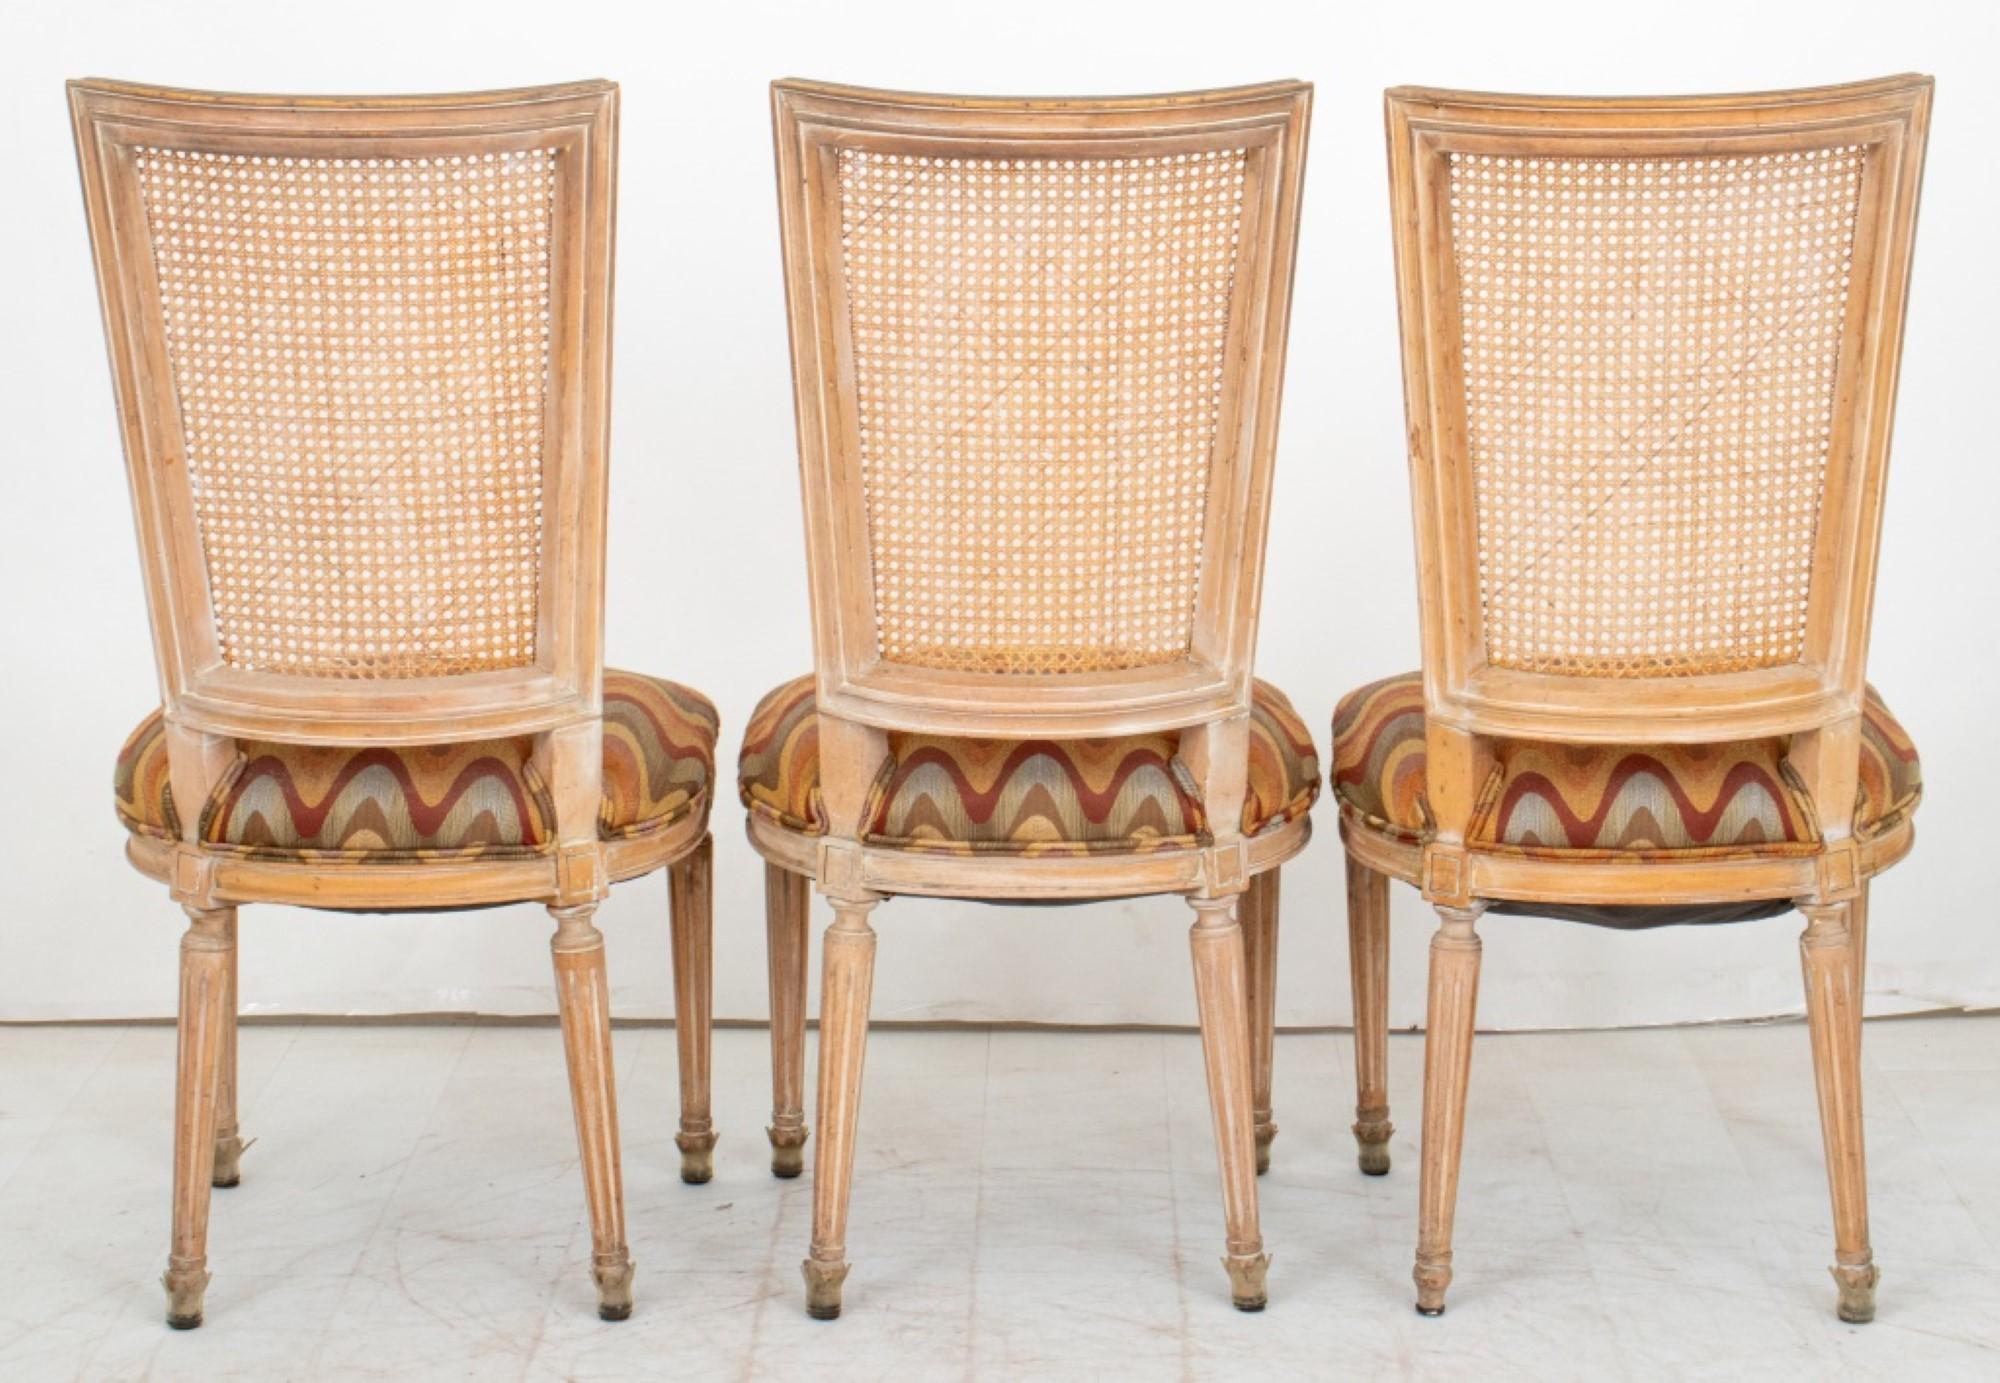 Set of Italian Neoclassical Style Chairs

Composition: Three hardwood and cane back dining or side chairs upholstered with polychrome wave motif textile, and two upholstered armchairs.

Dealer: S138XX